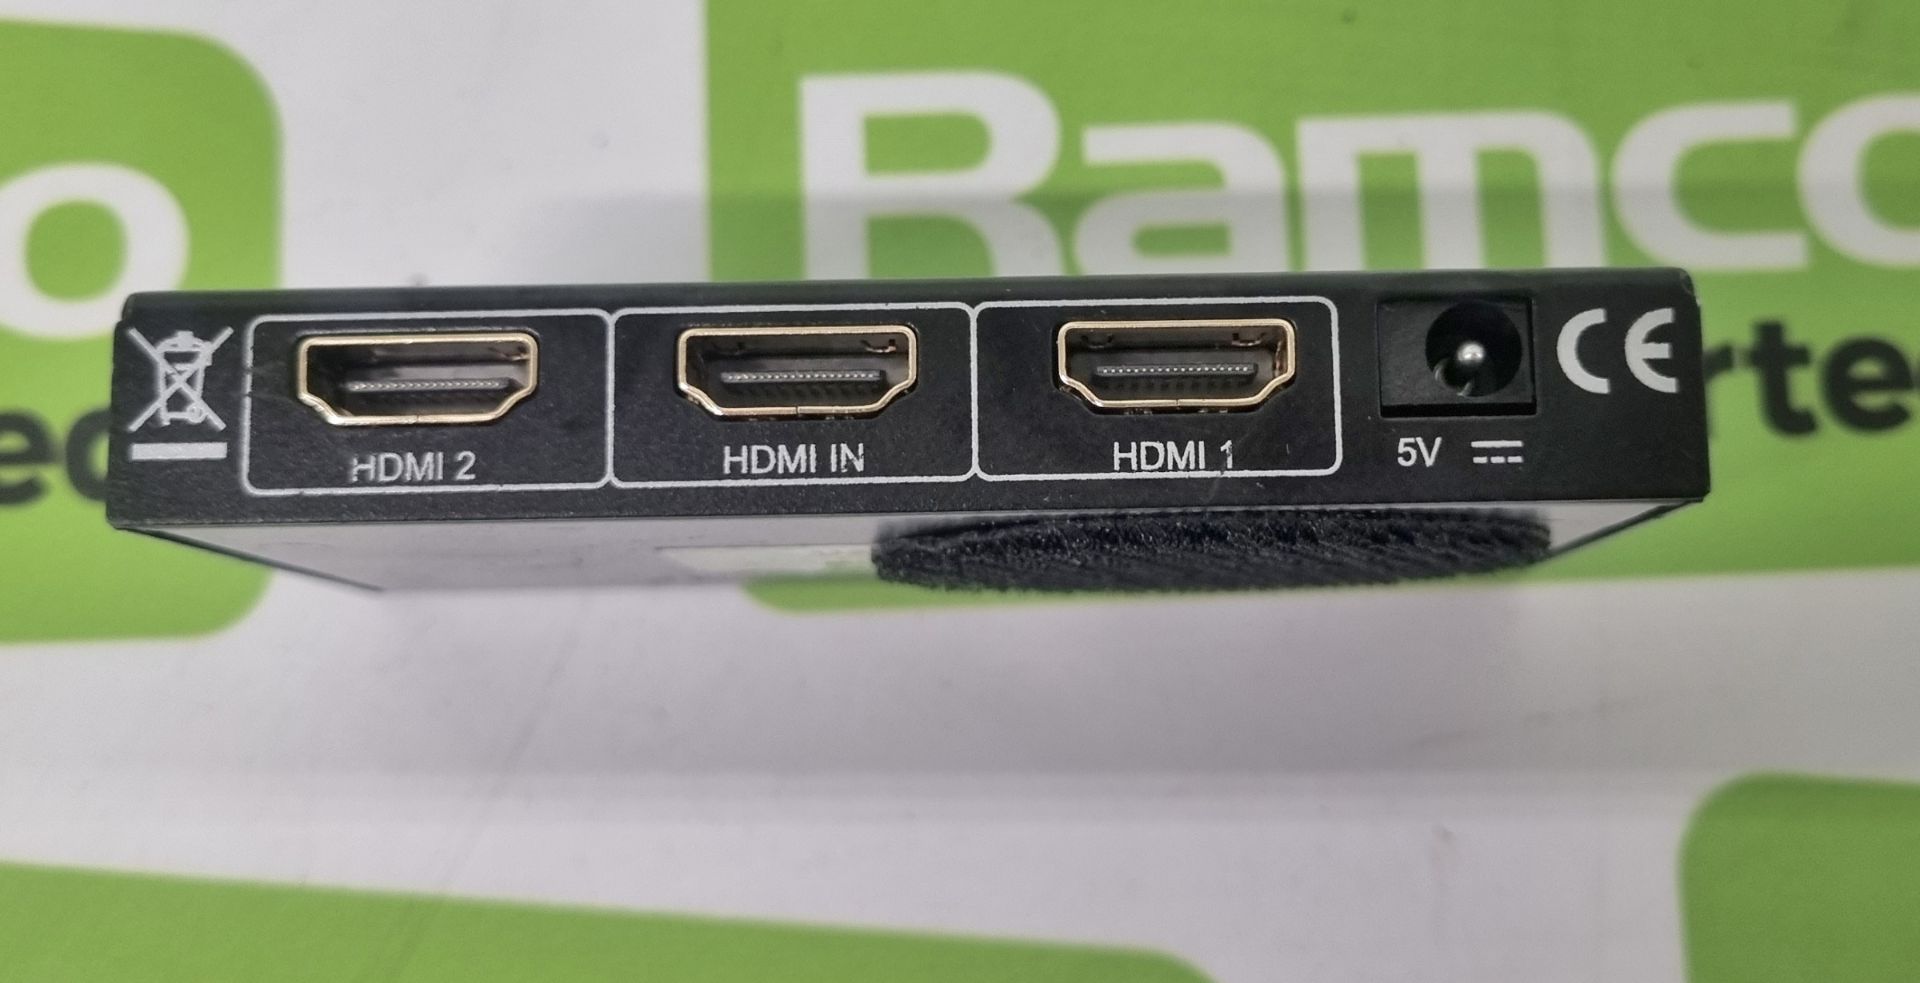 SY-HS12E-18G 1x2 HDMI 2.0 (18Gbps) splitter - Image 4 of 6